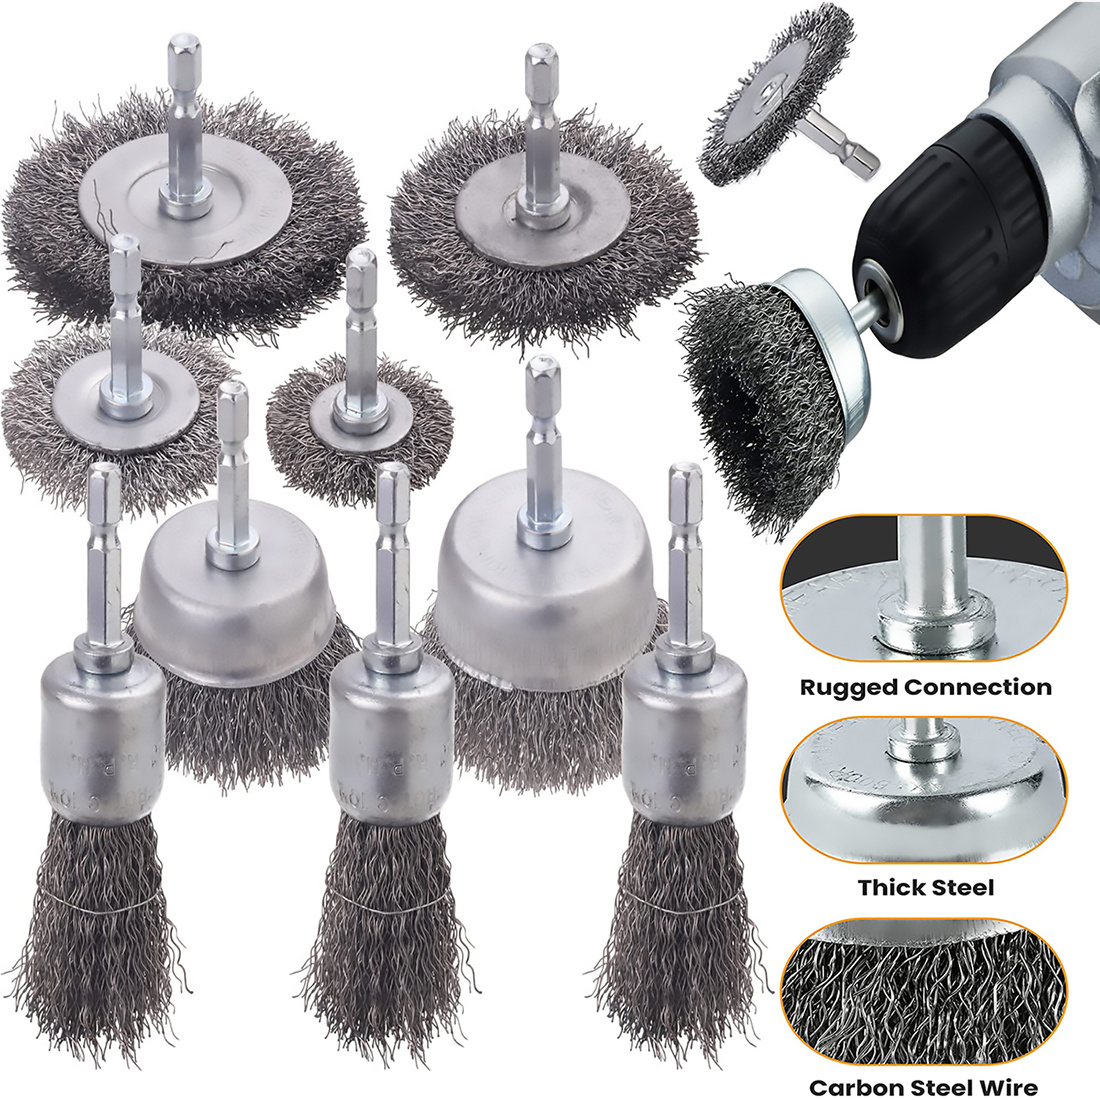 Hand Drill Brush/Wheel Set for Wood/Metal Rust Removal (4 Pieces)